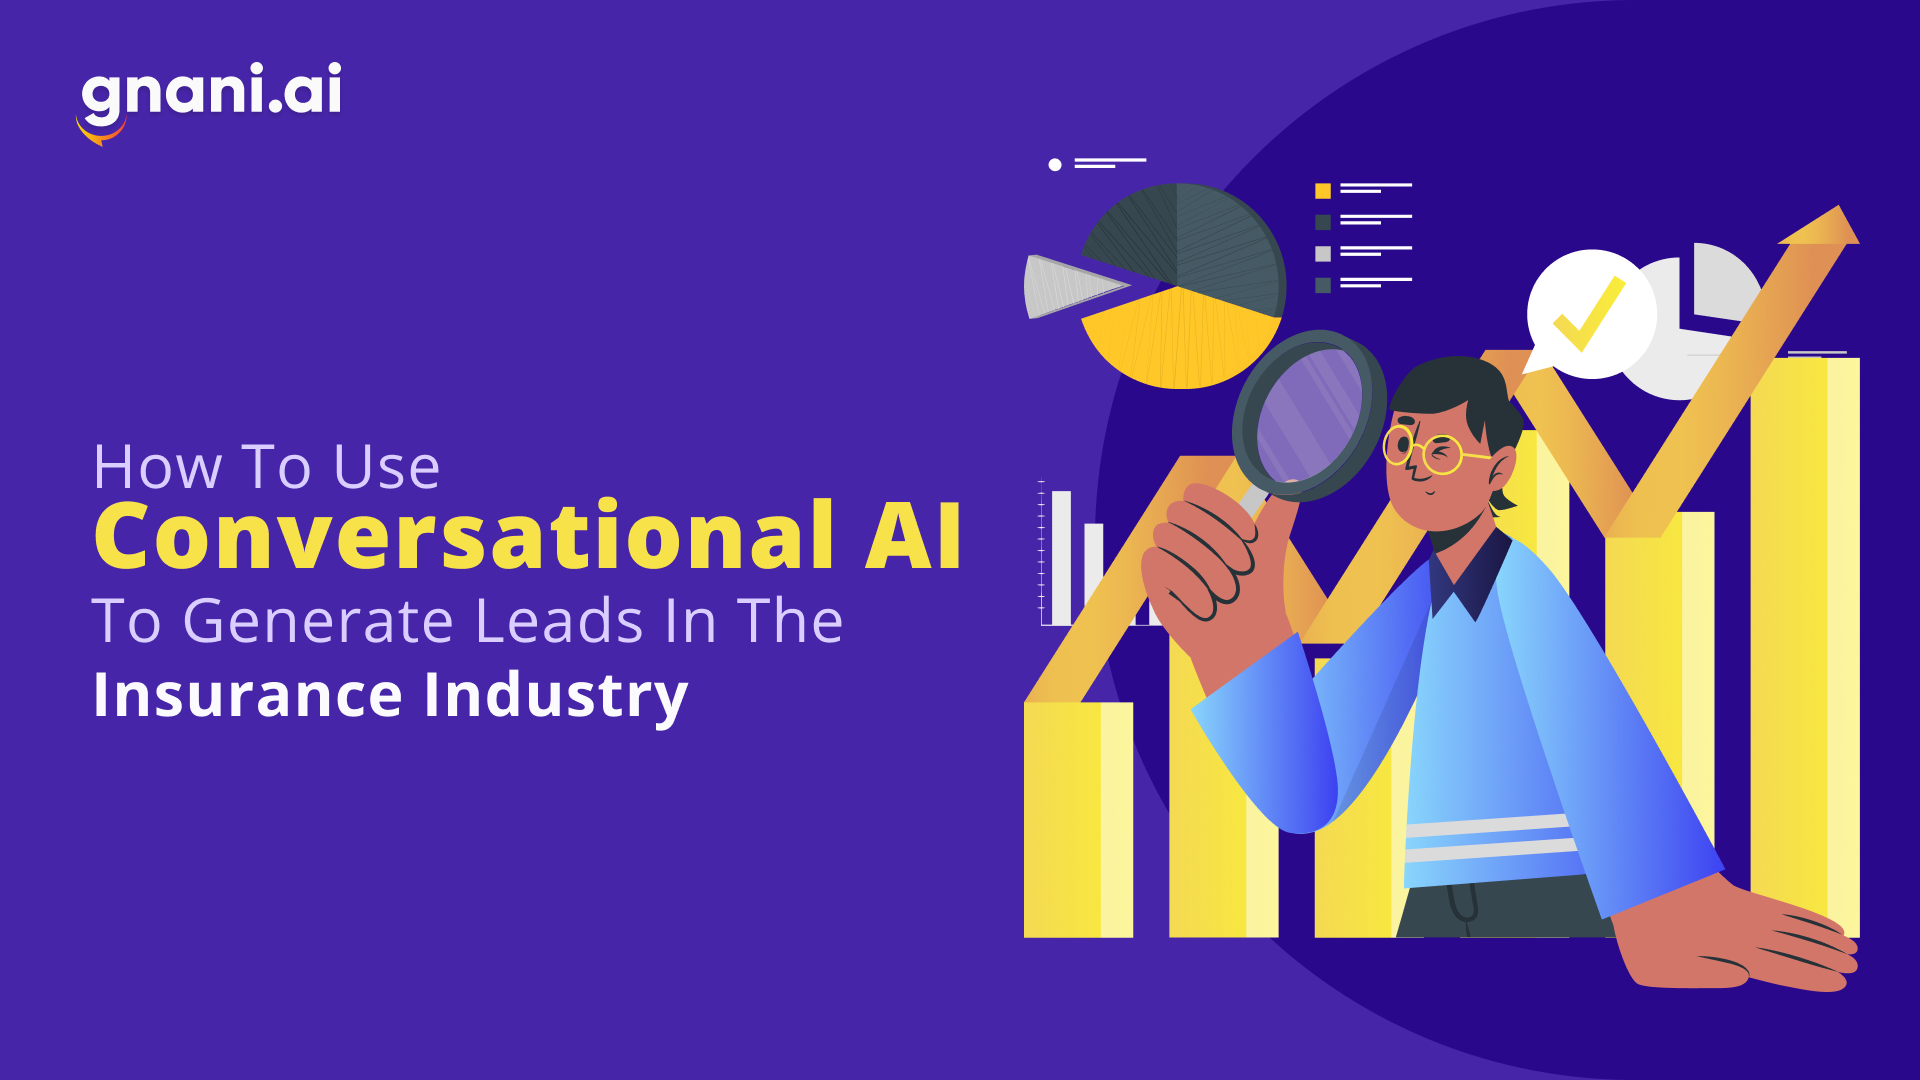 conversational ai for lead generation in the insurance industry